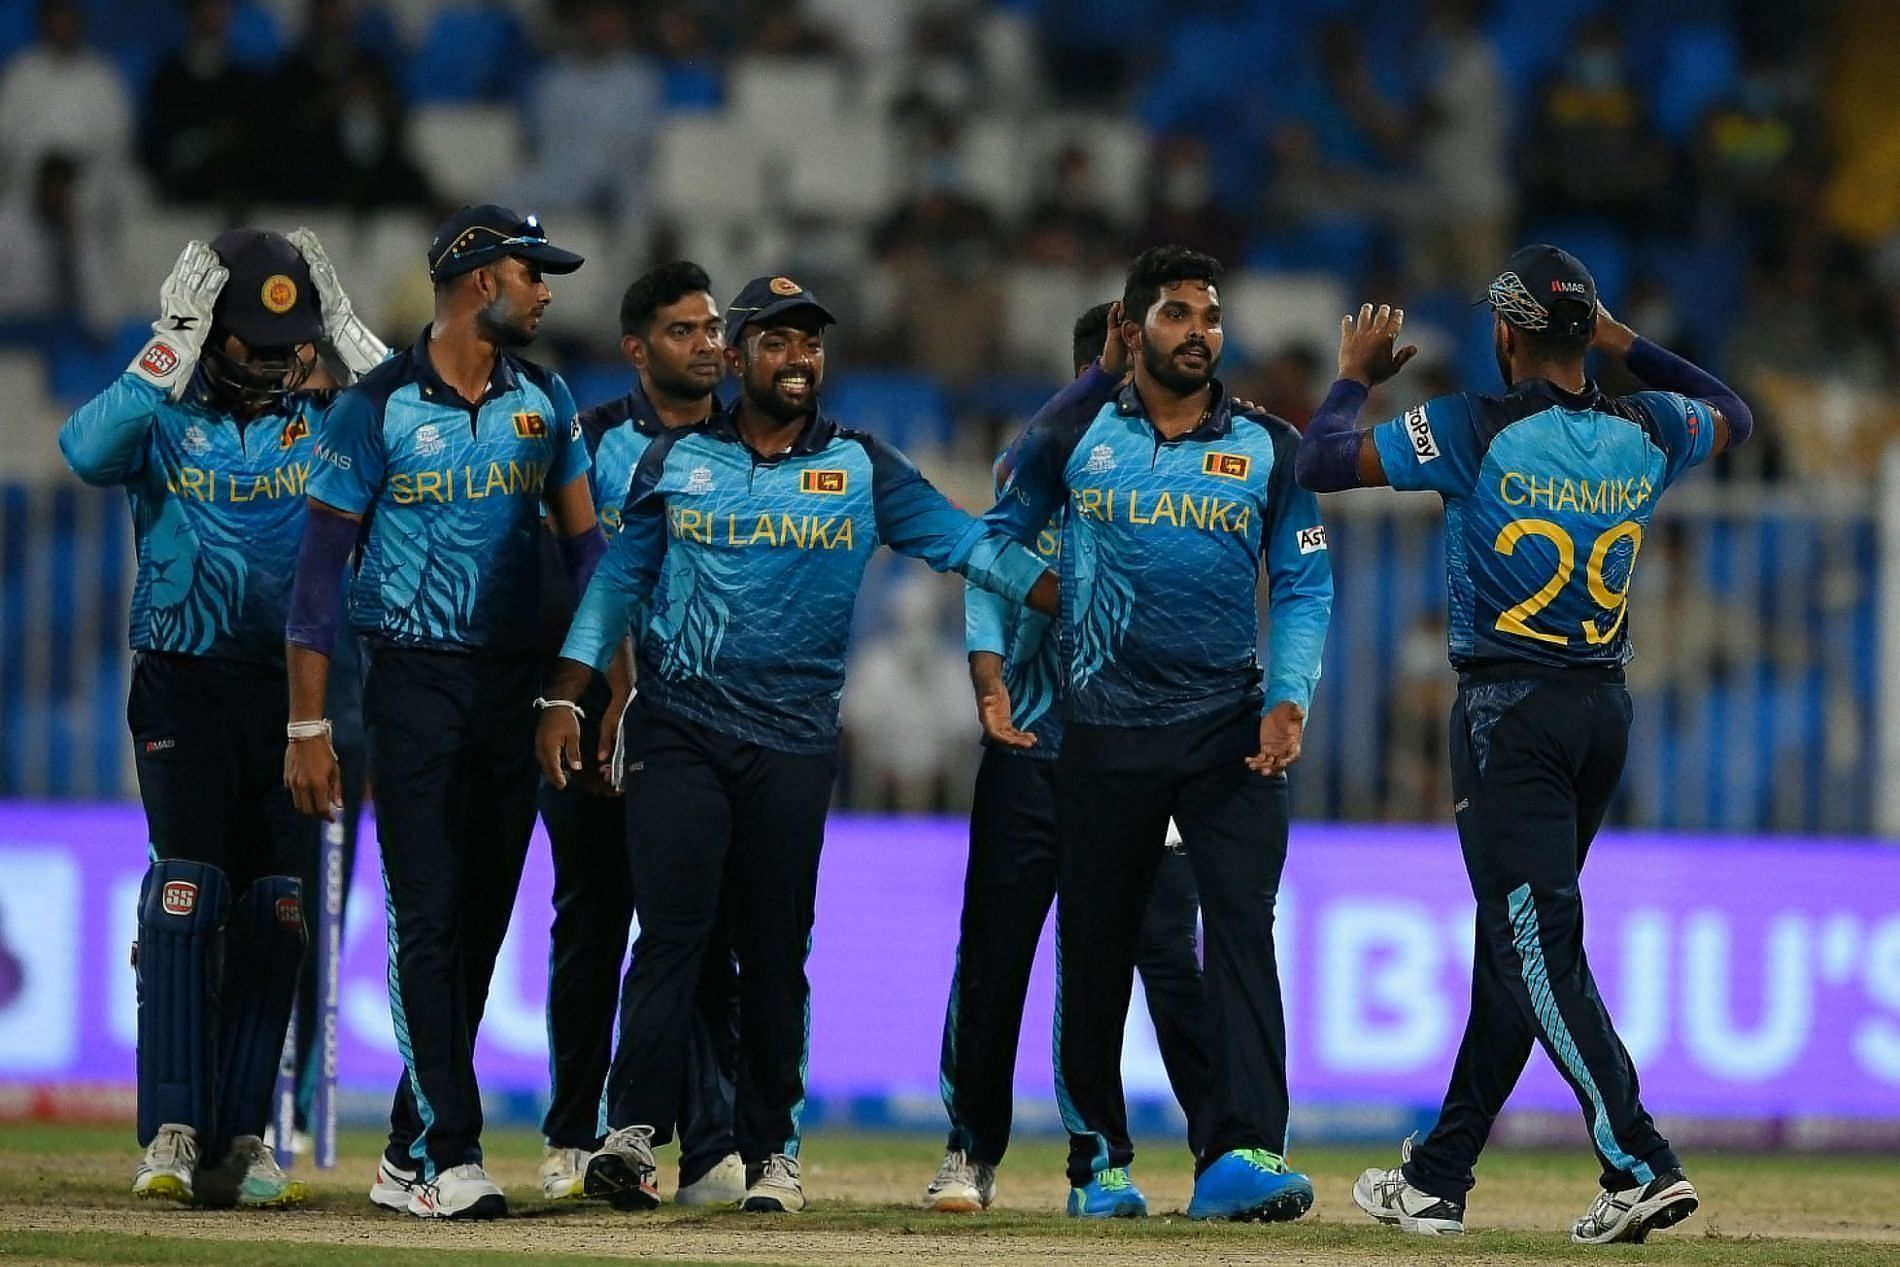 Sri Lanka proved too good for Netherlands. Pic: T20WorldCup/ Twitter